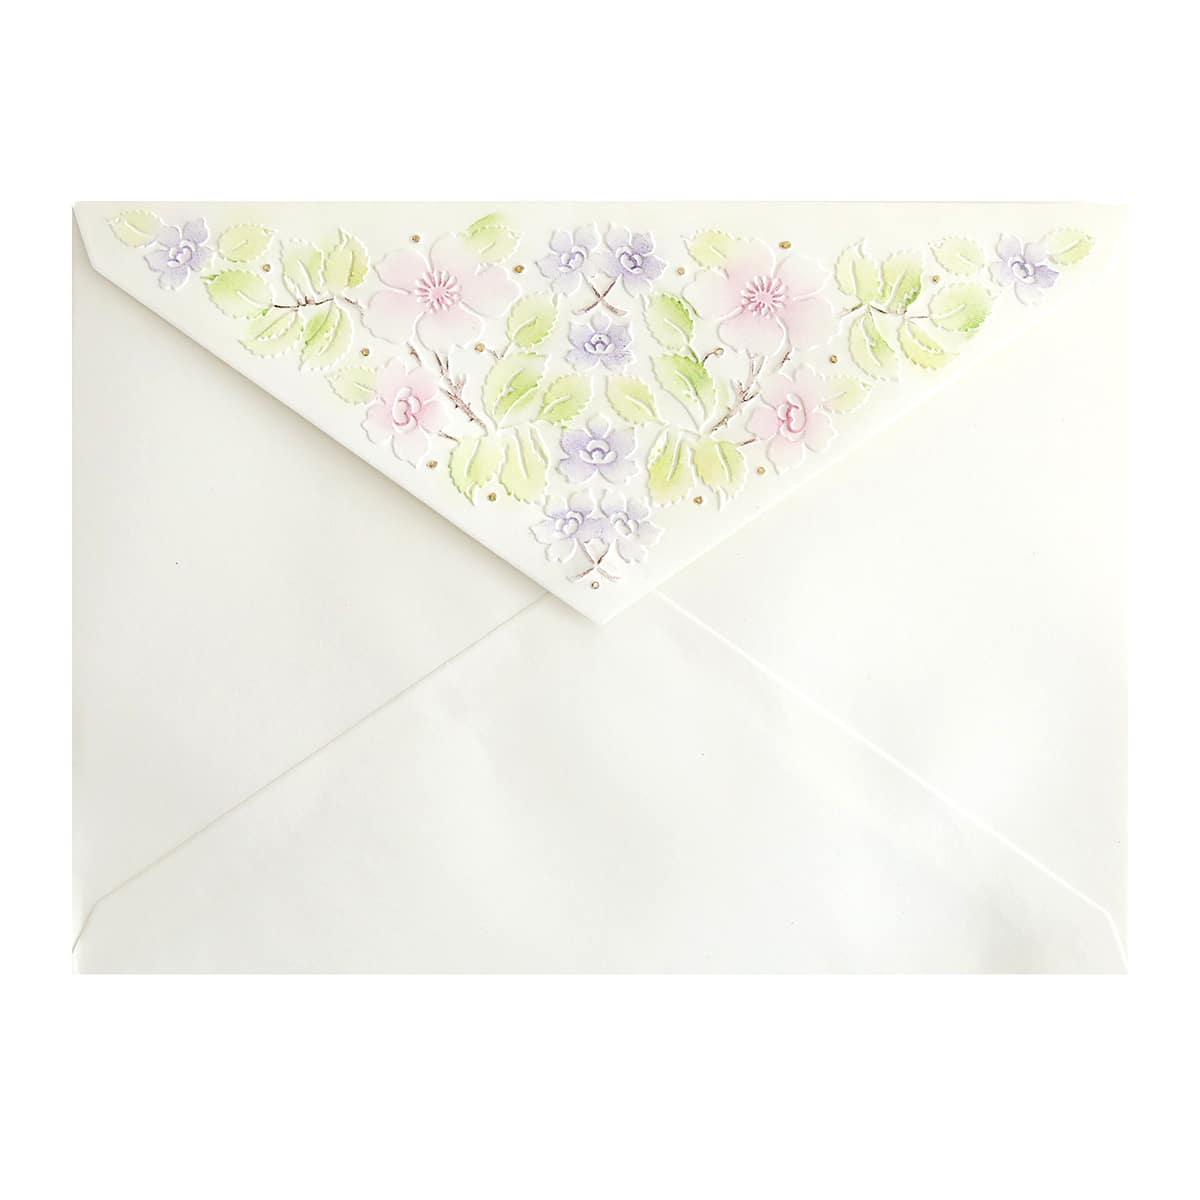 a white envelope with a floral design on it.